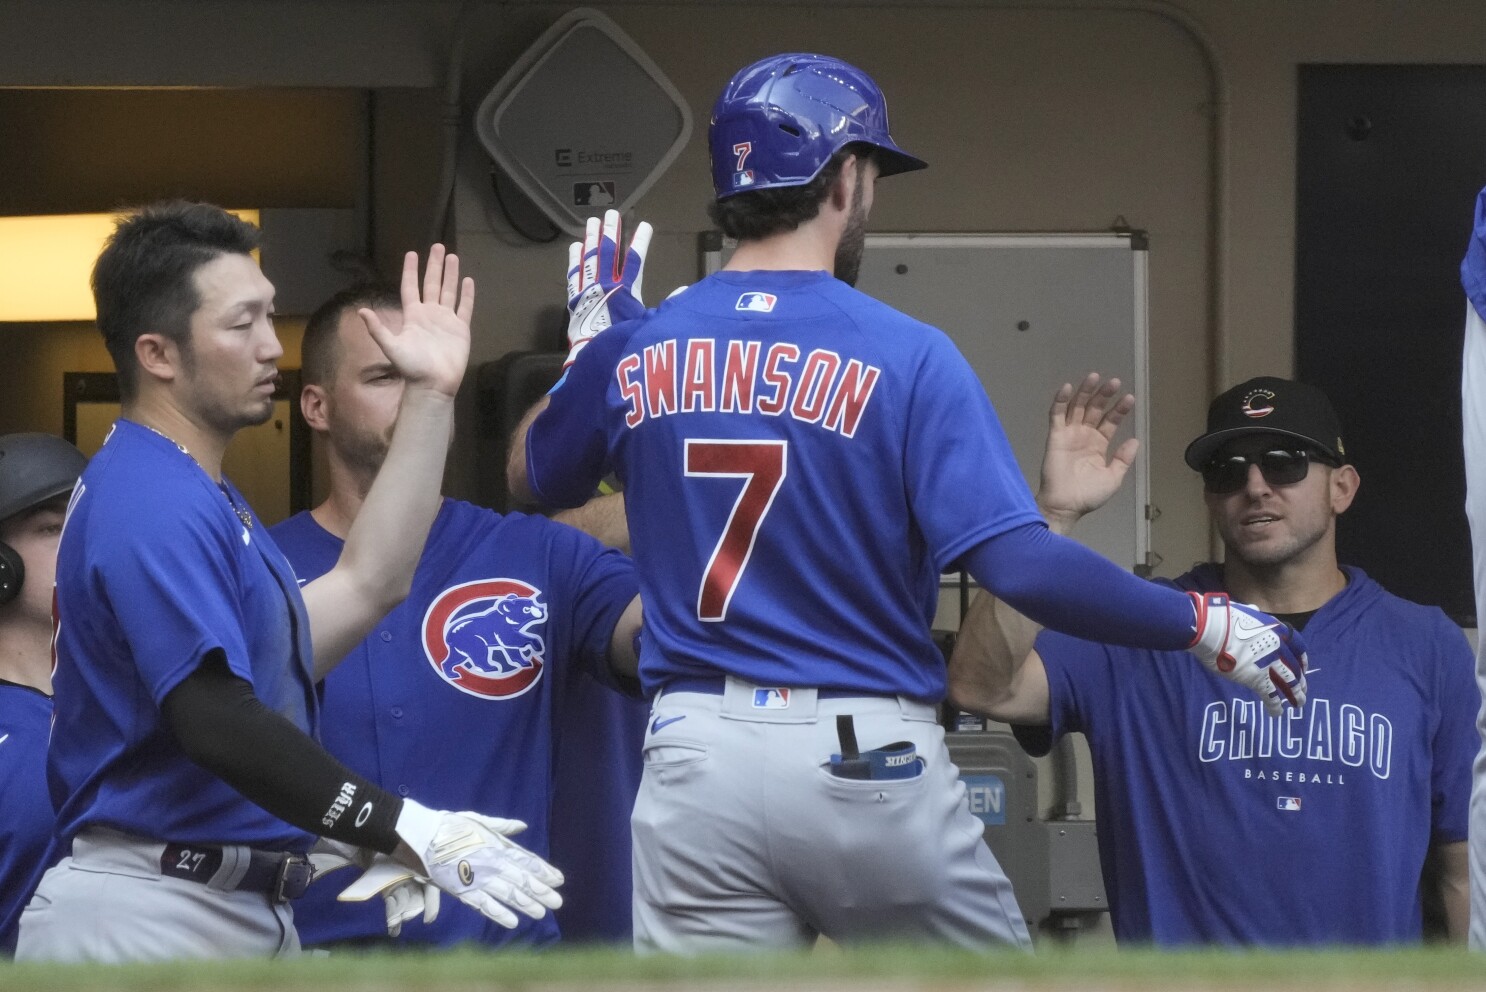 Dansby Swanson returns at a vital time for the Cubs - CHGO